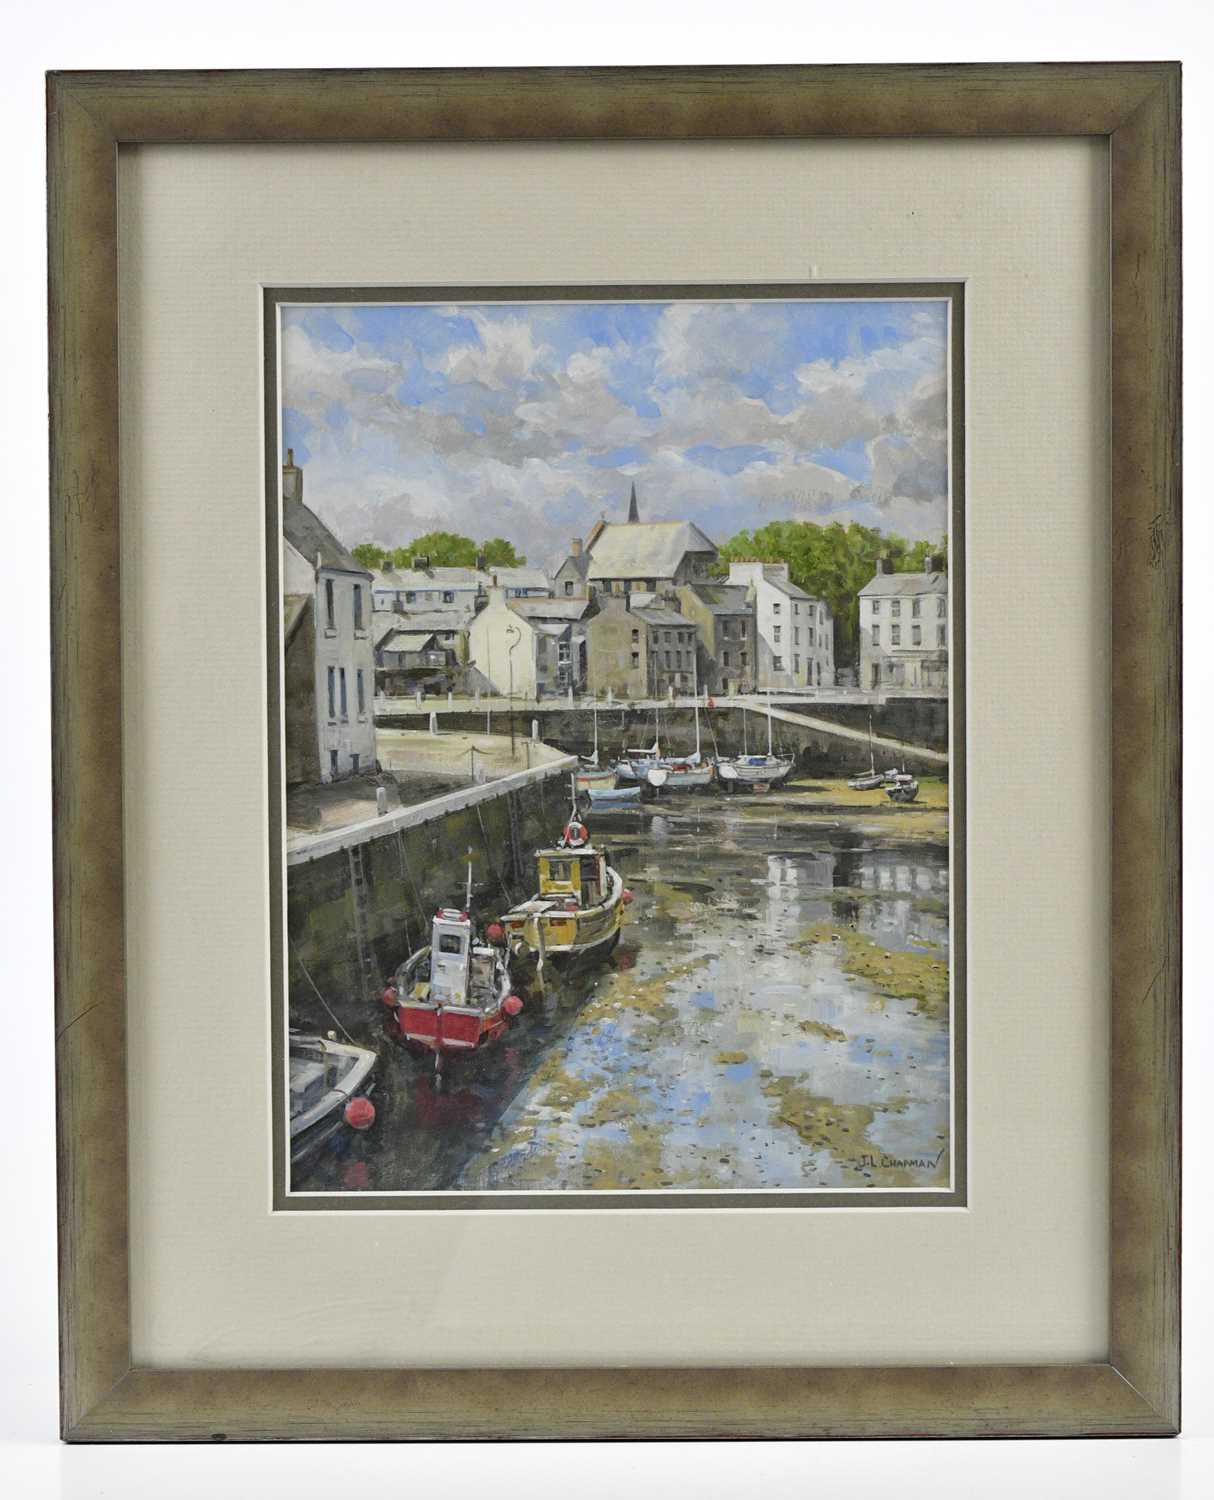 J L CHAPMAN (20TH CENTURY); acrylic, 'Castletown Harbour', signed, 25.5 x 19cm, framed and glazed.